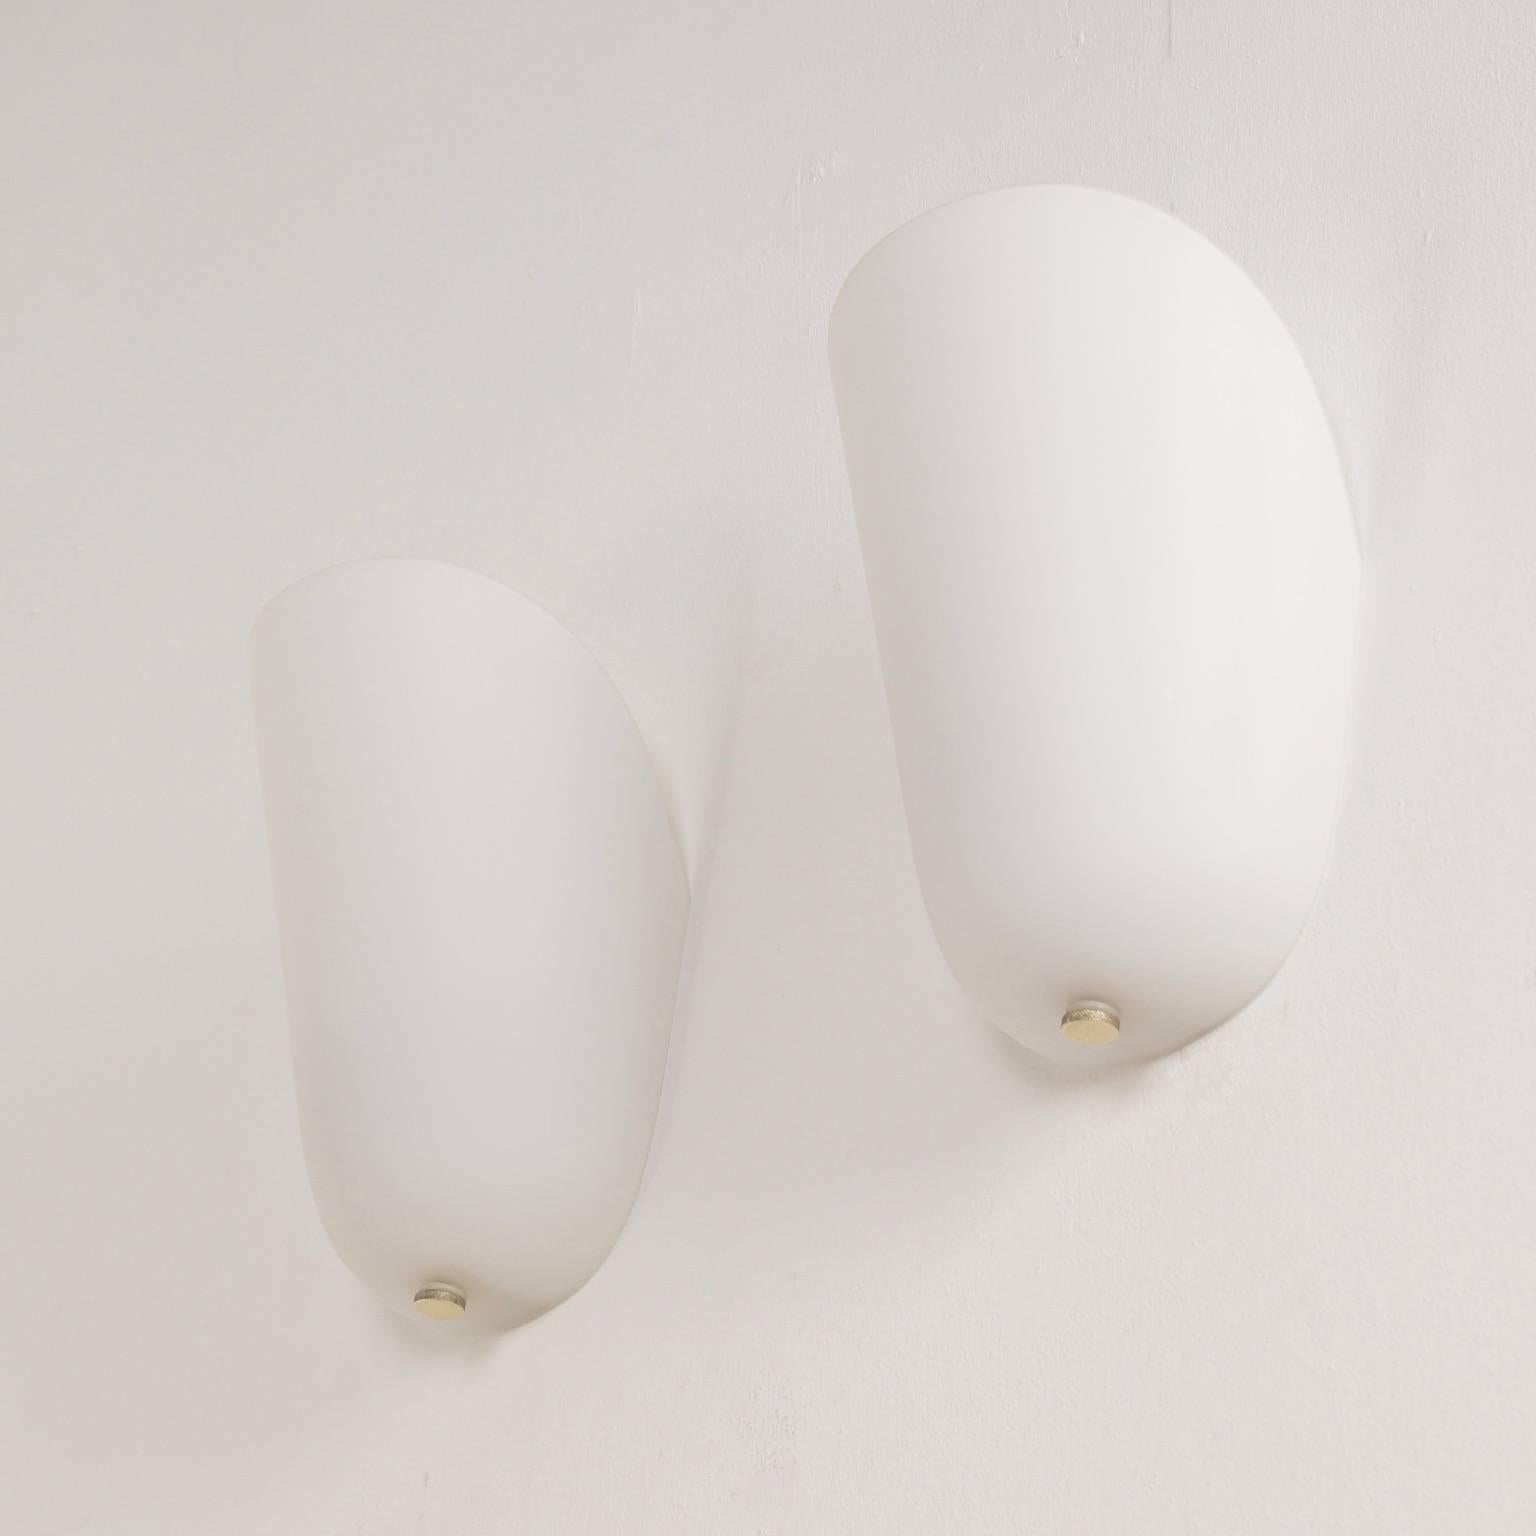 Set indoor wall lamps made in Italy, circa 1958. These wall lamps come from executive boardroom decorated in about 1958. The glass is made of two layers (like the Venini Murano lamps), satin opal glass on the outside and white glass on the inside